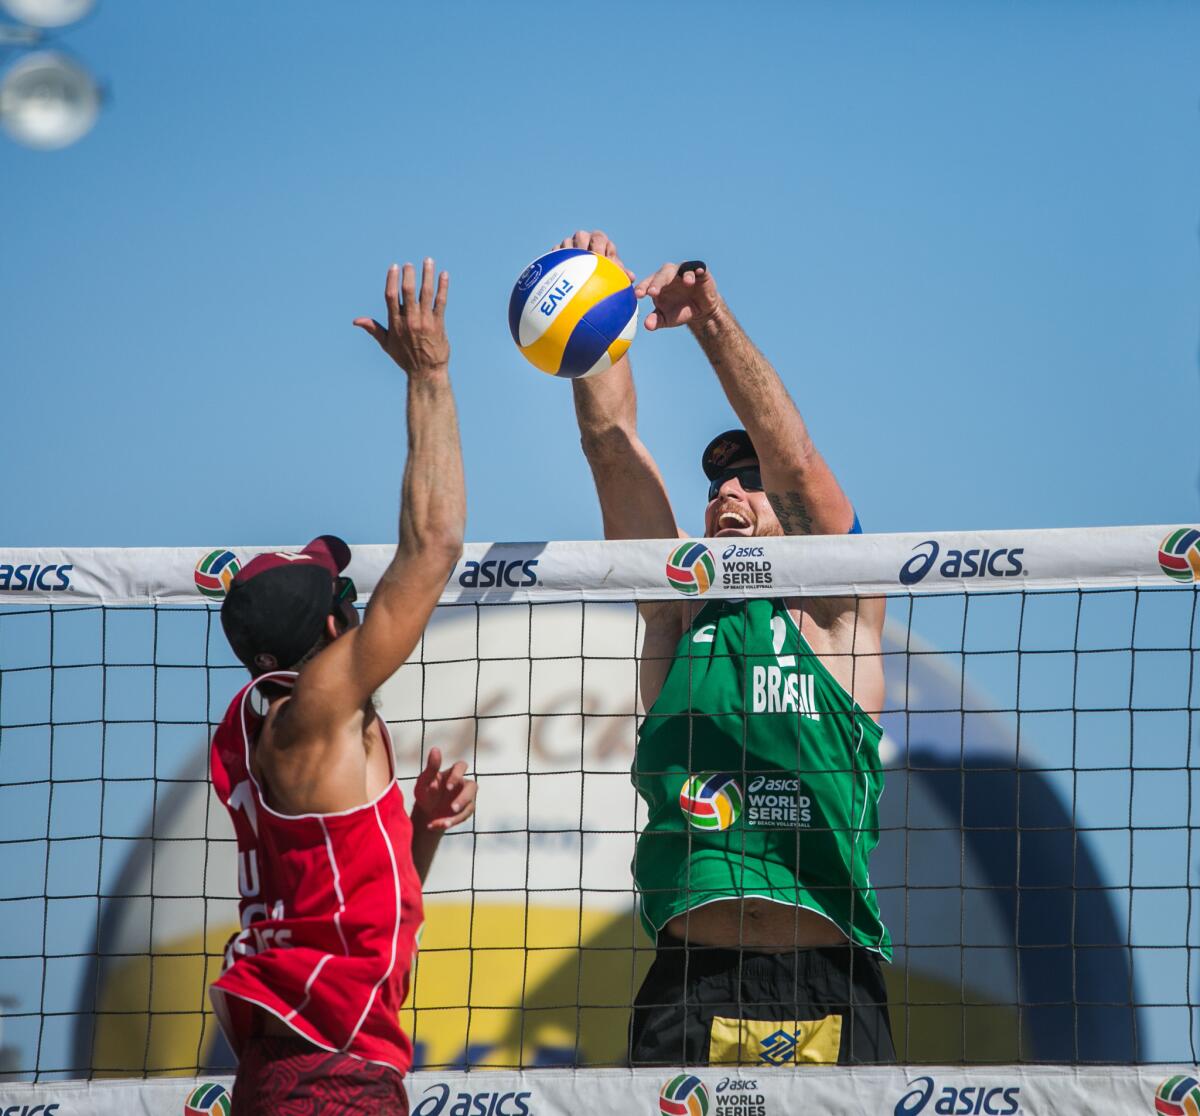 Alison Cerutti blocks a shot by Nick Lucena during the championship match of the World Series of Beach Volleyball.